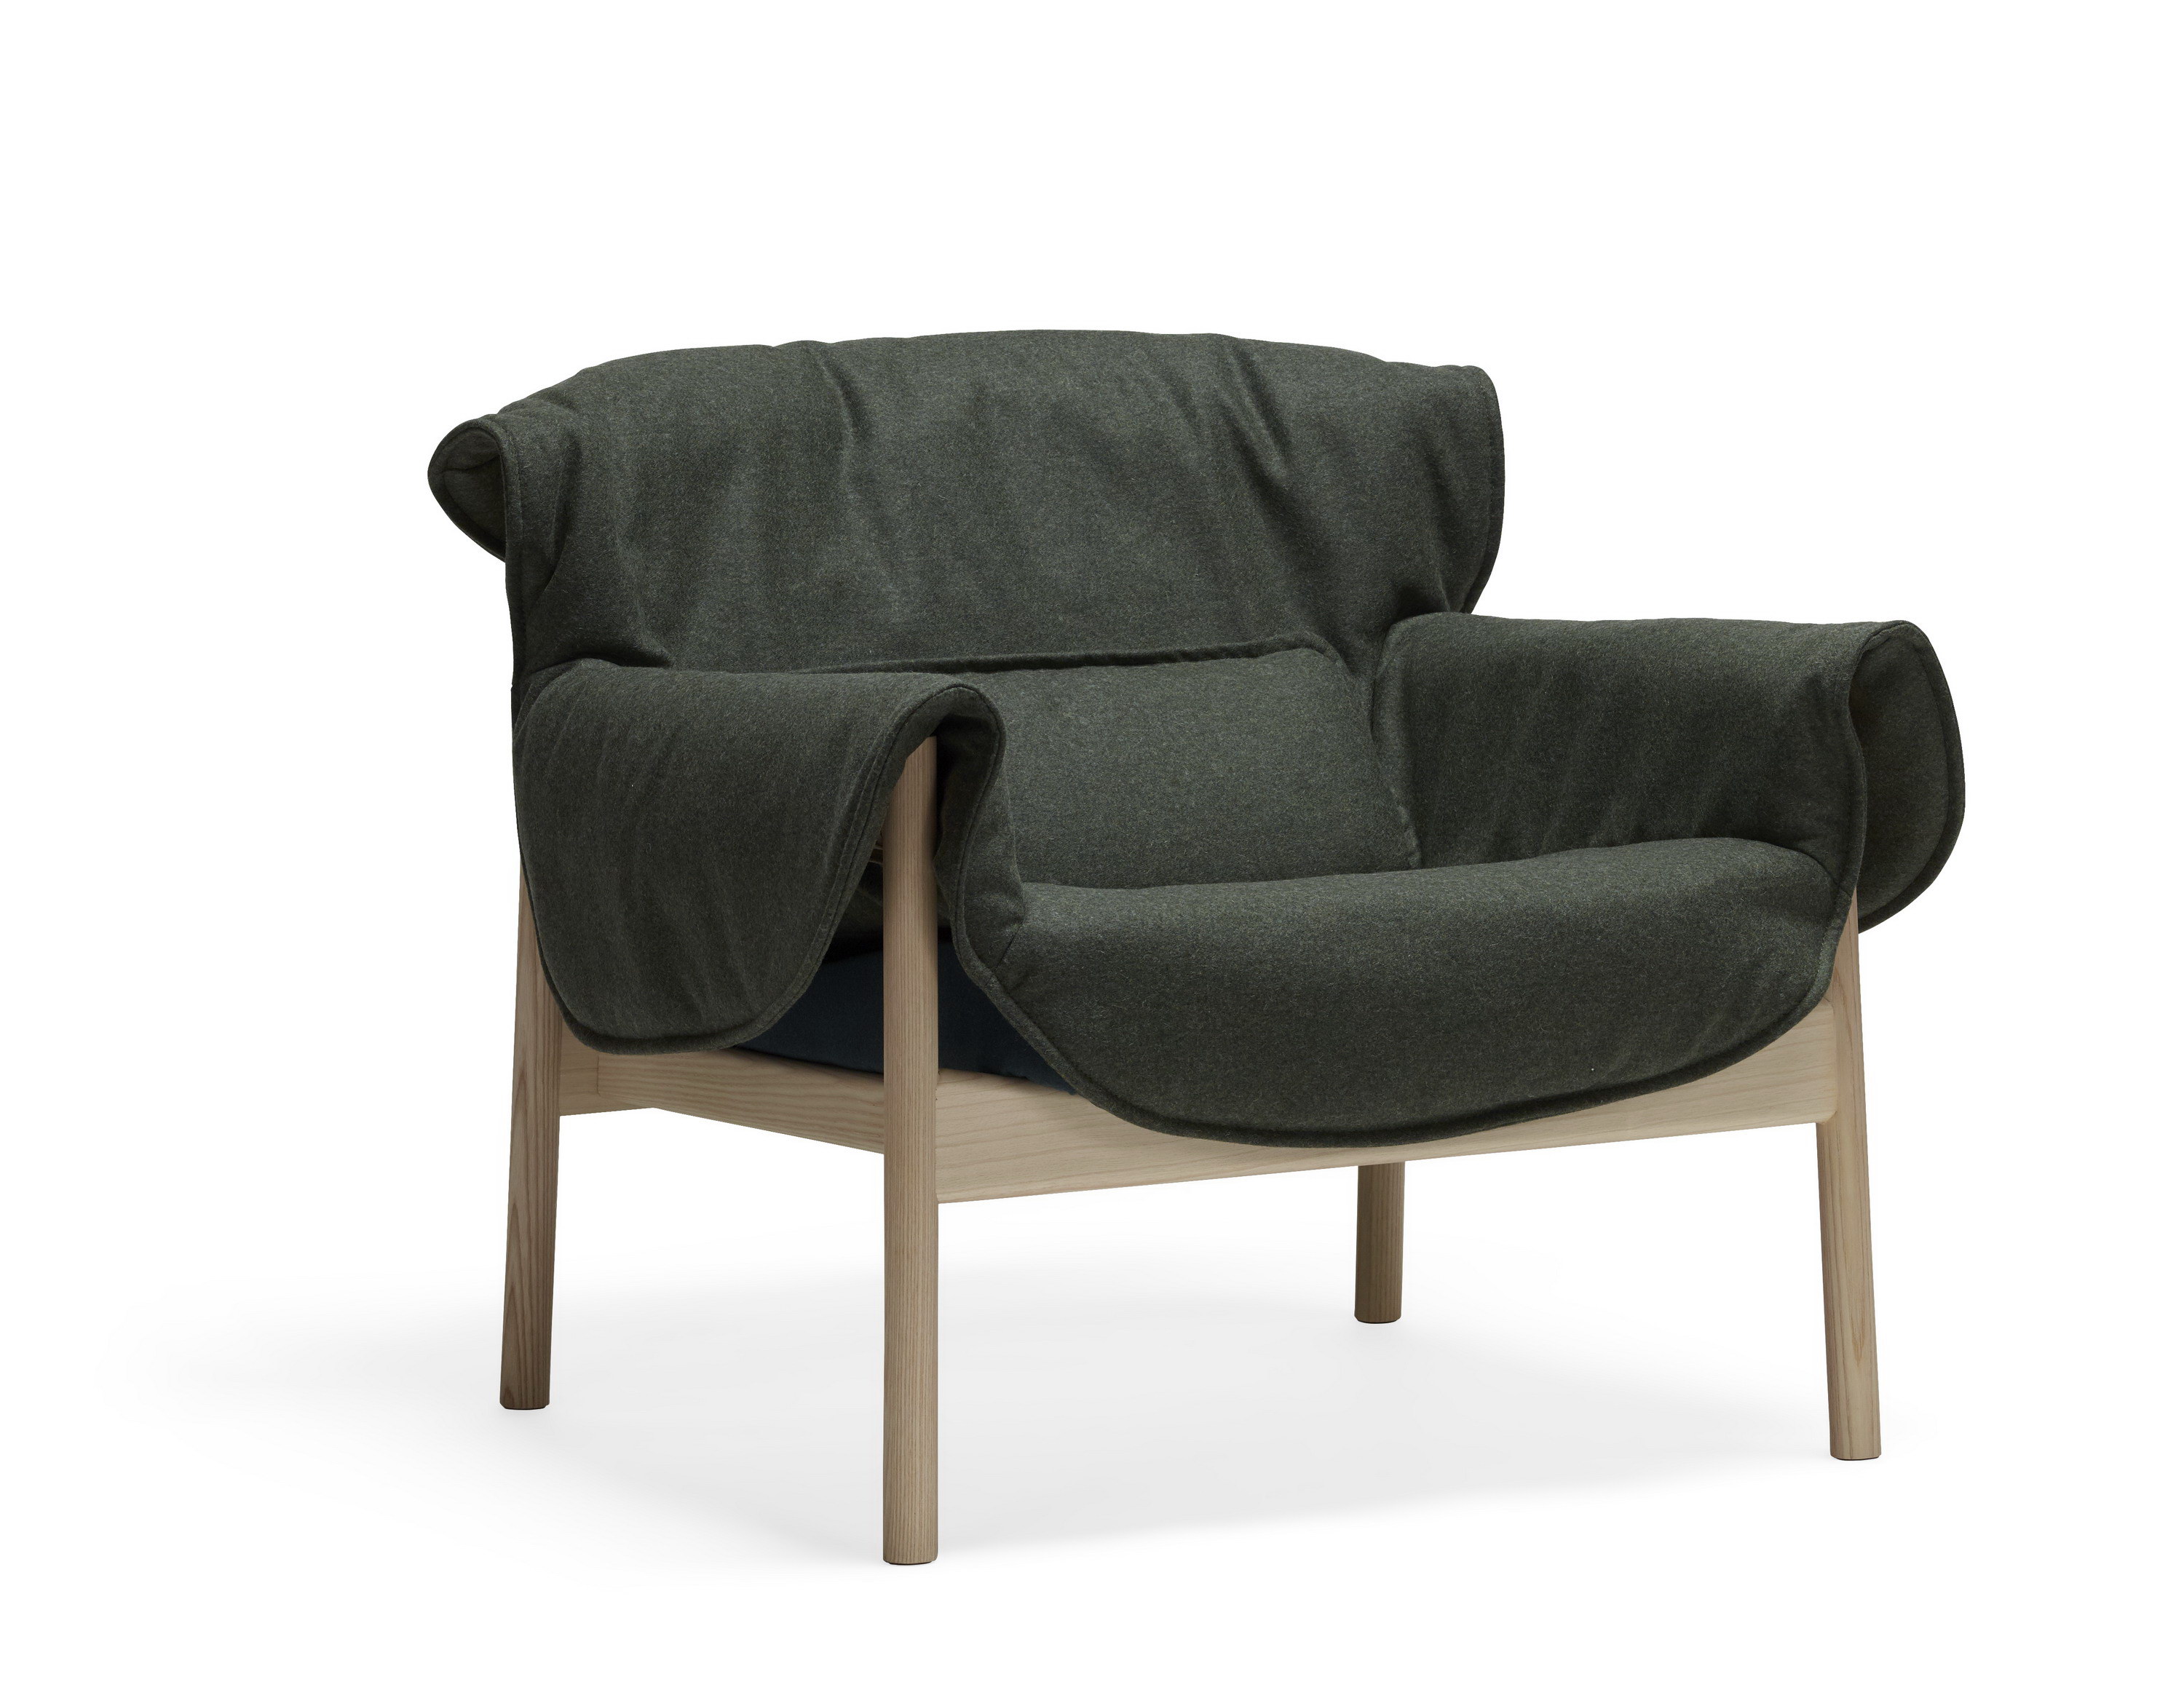 Agnes Chair by Andreas Engesvik